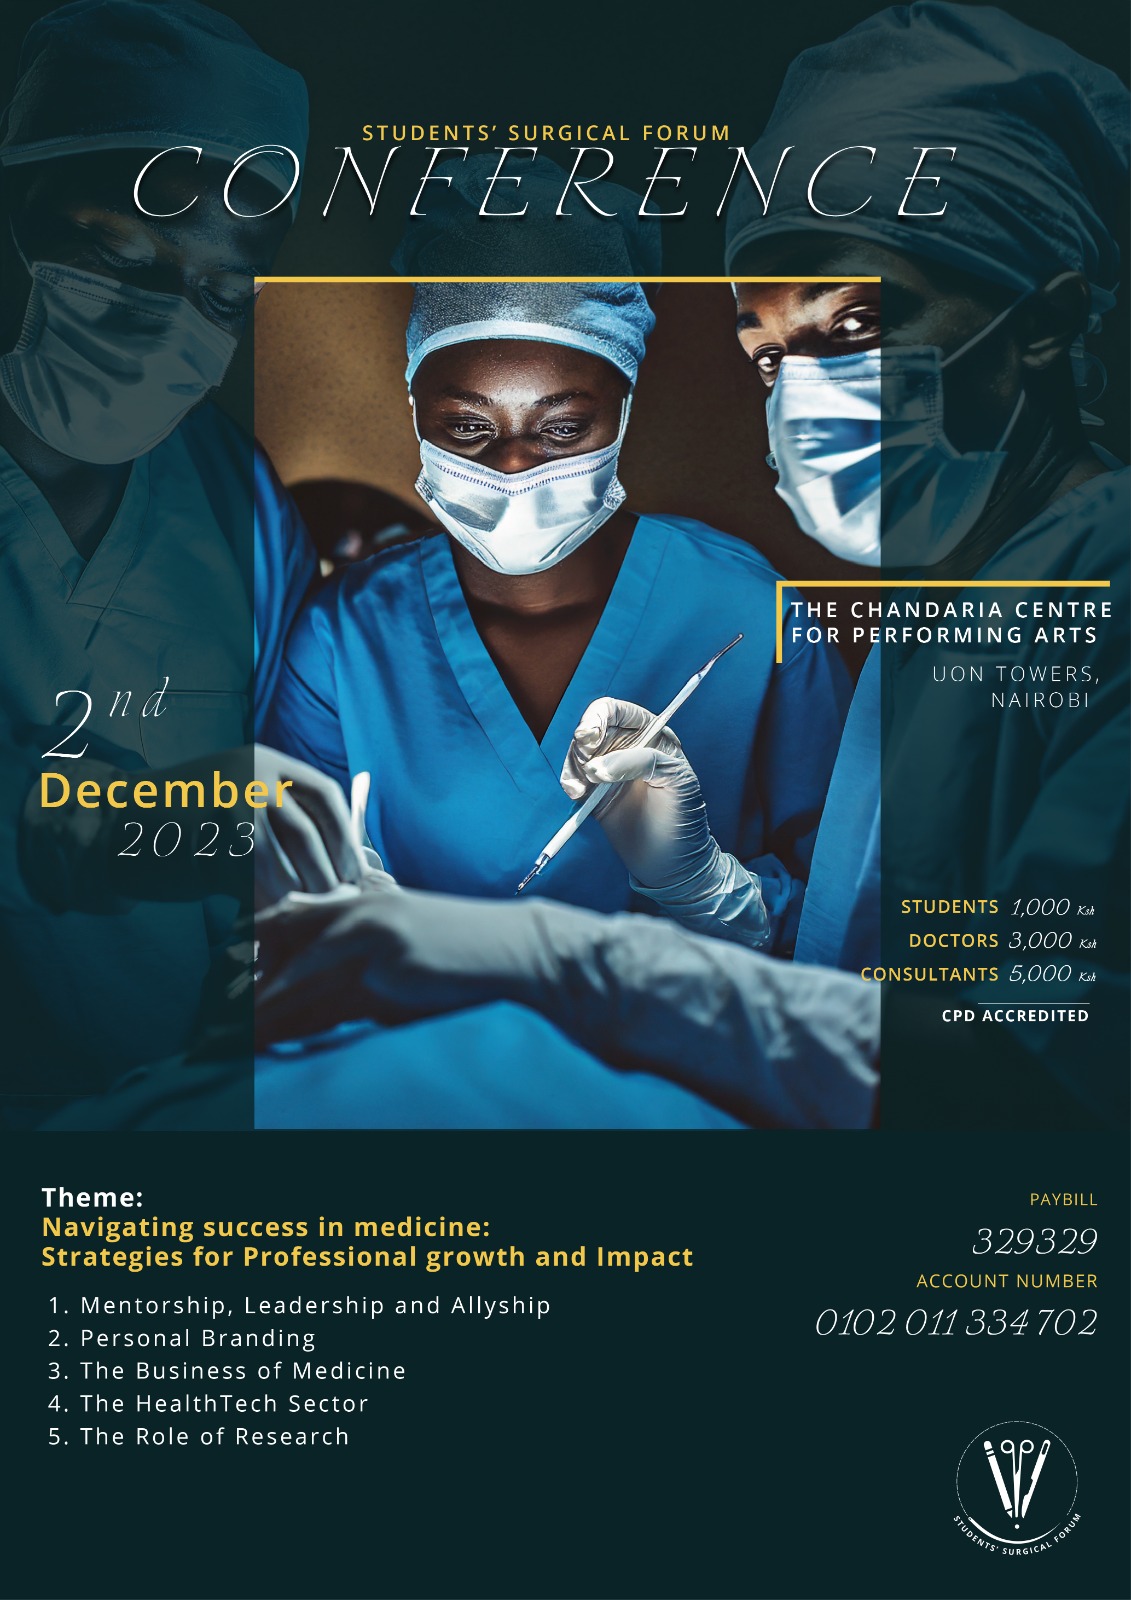 Students surgical forum - Conference